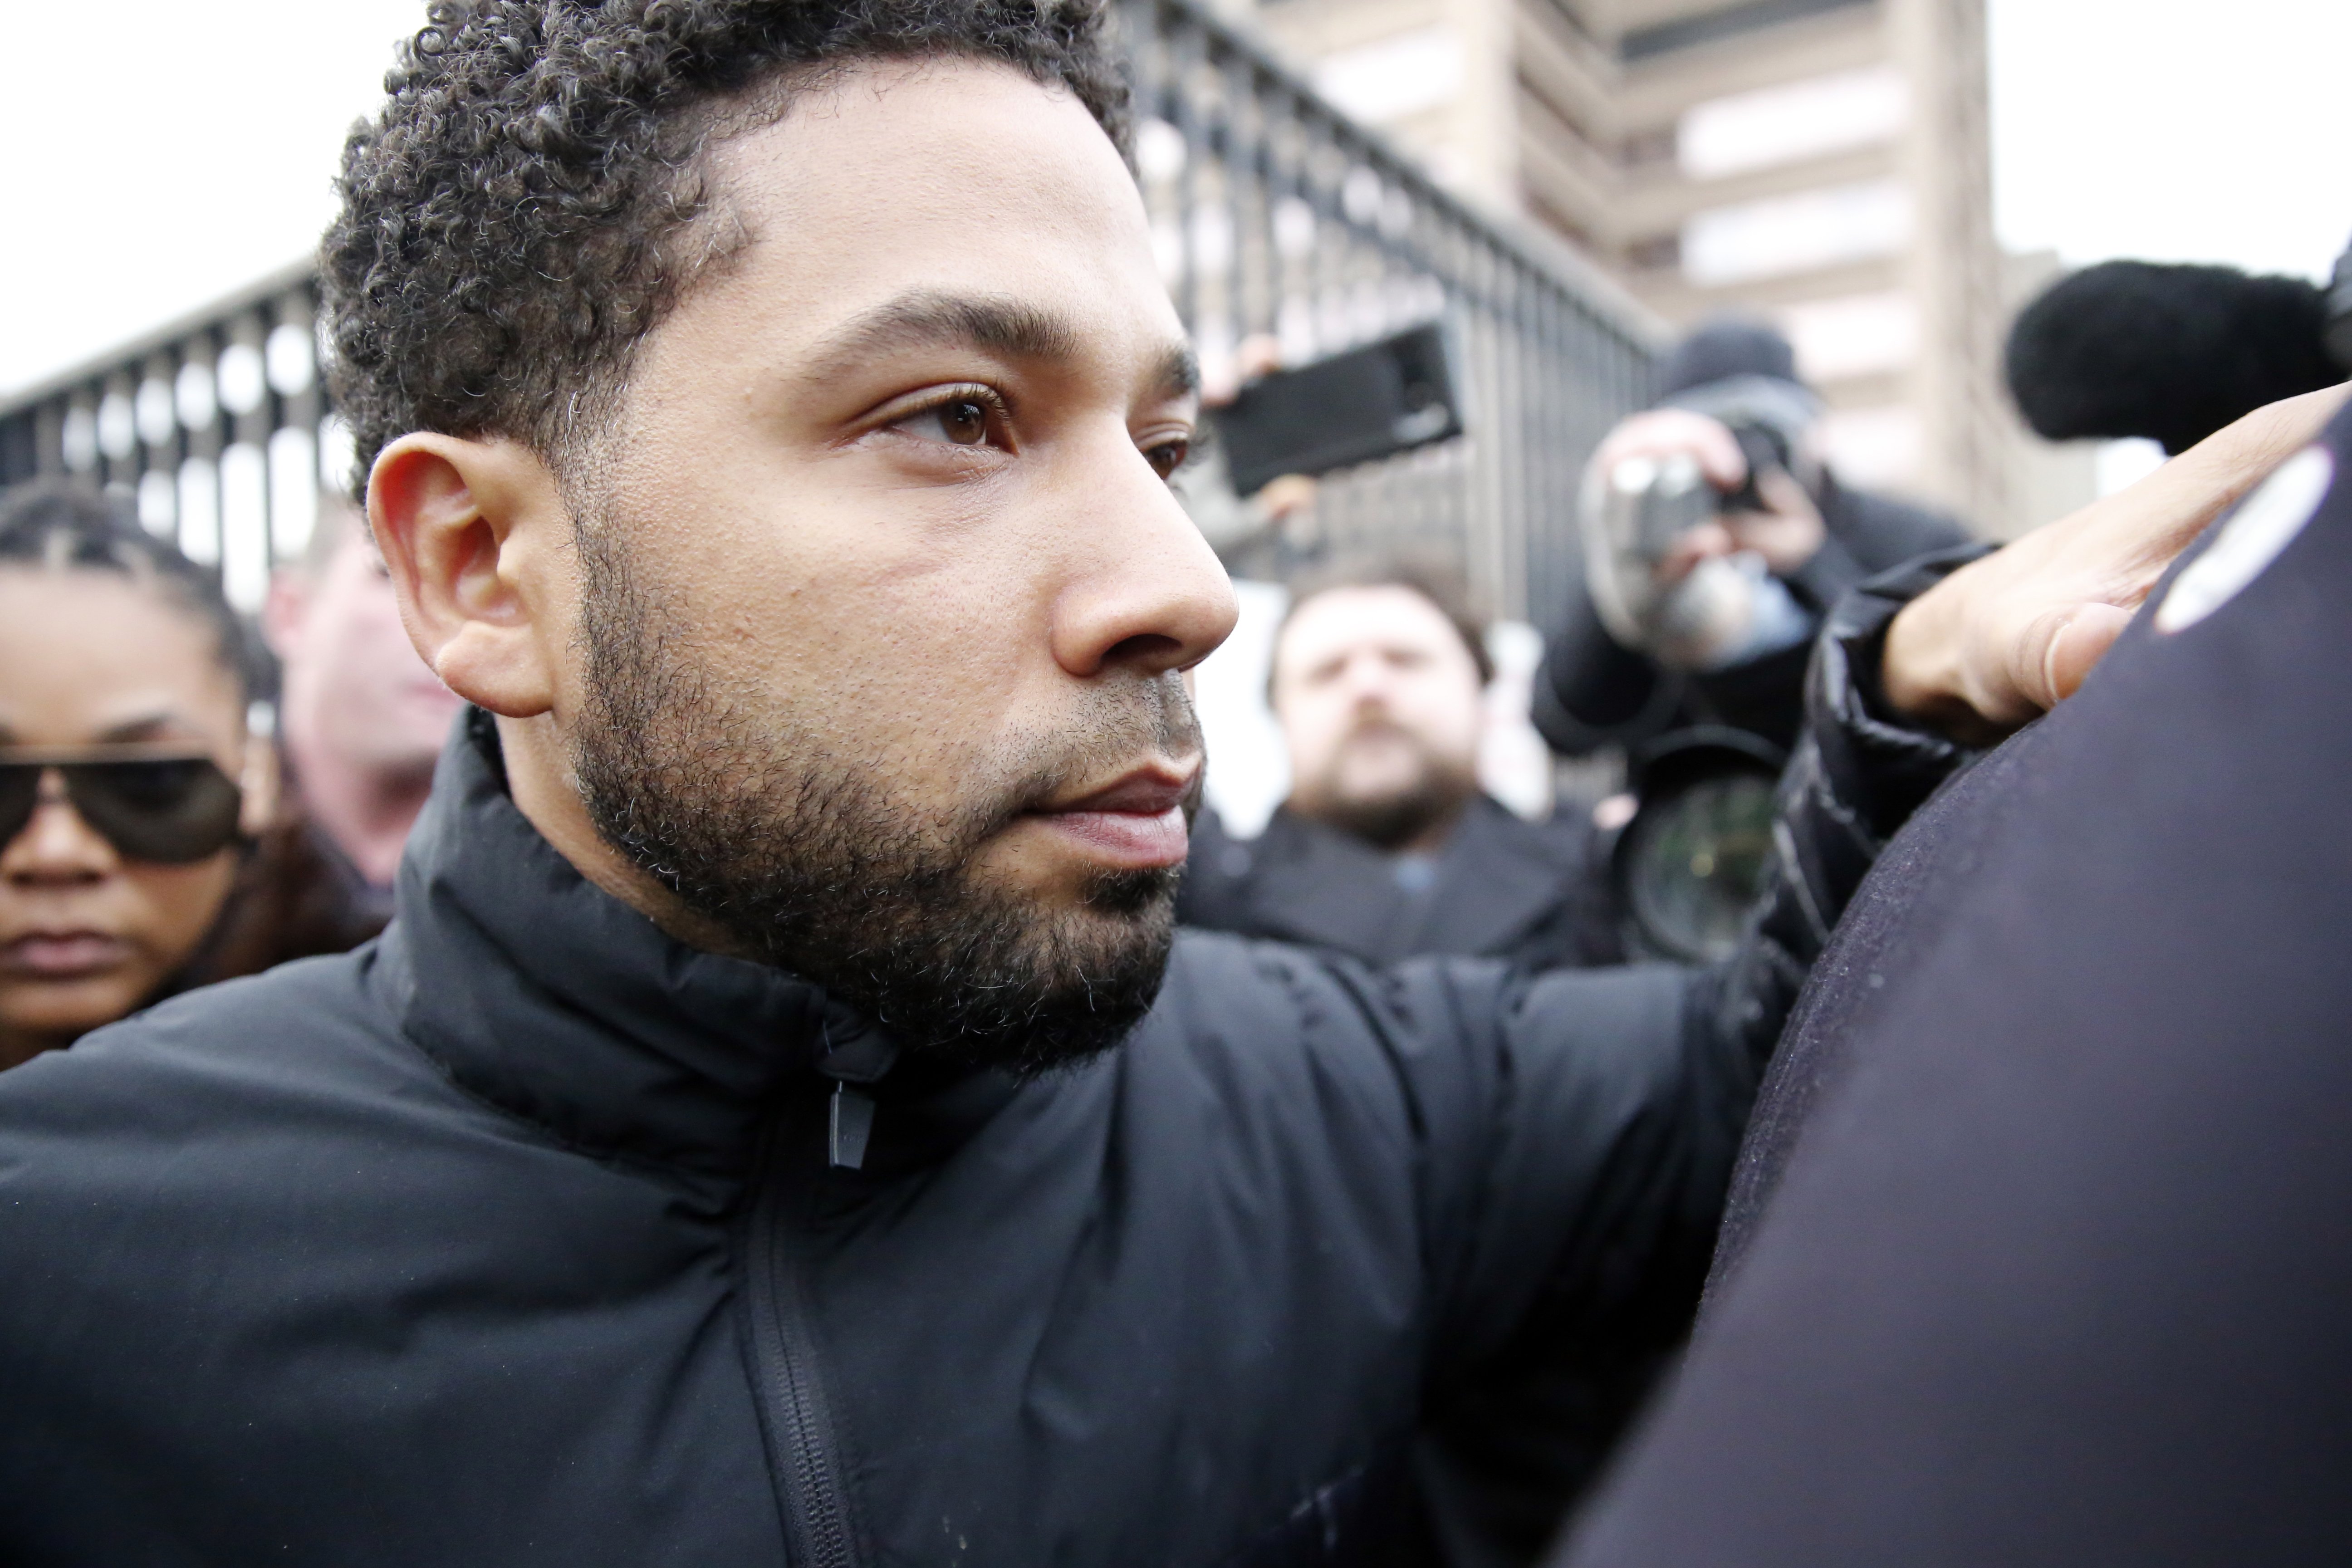 Jussie Smollett leaving the Cook County Jail on bond | Photo: Getty Images